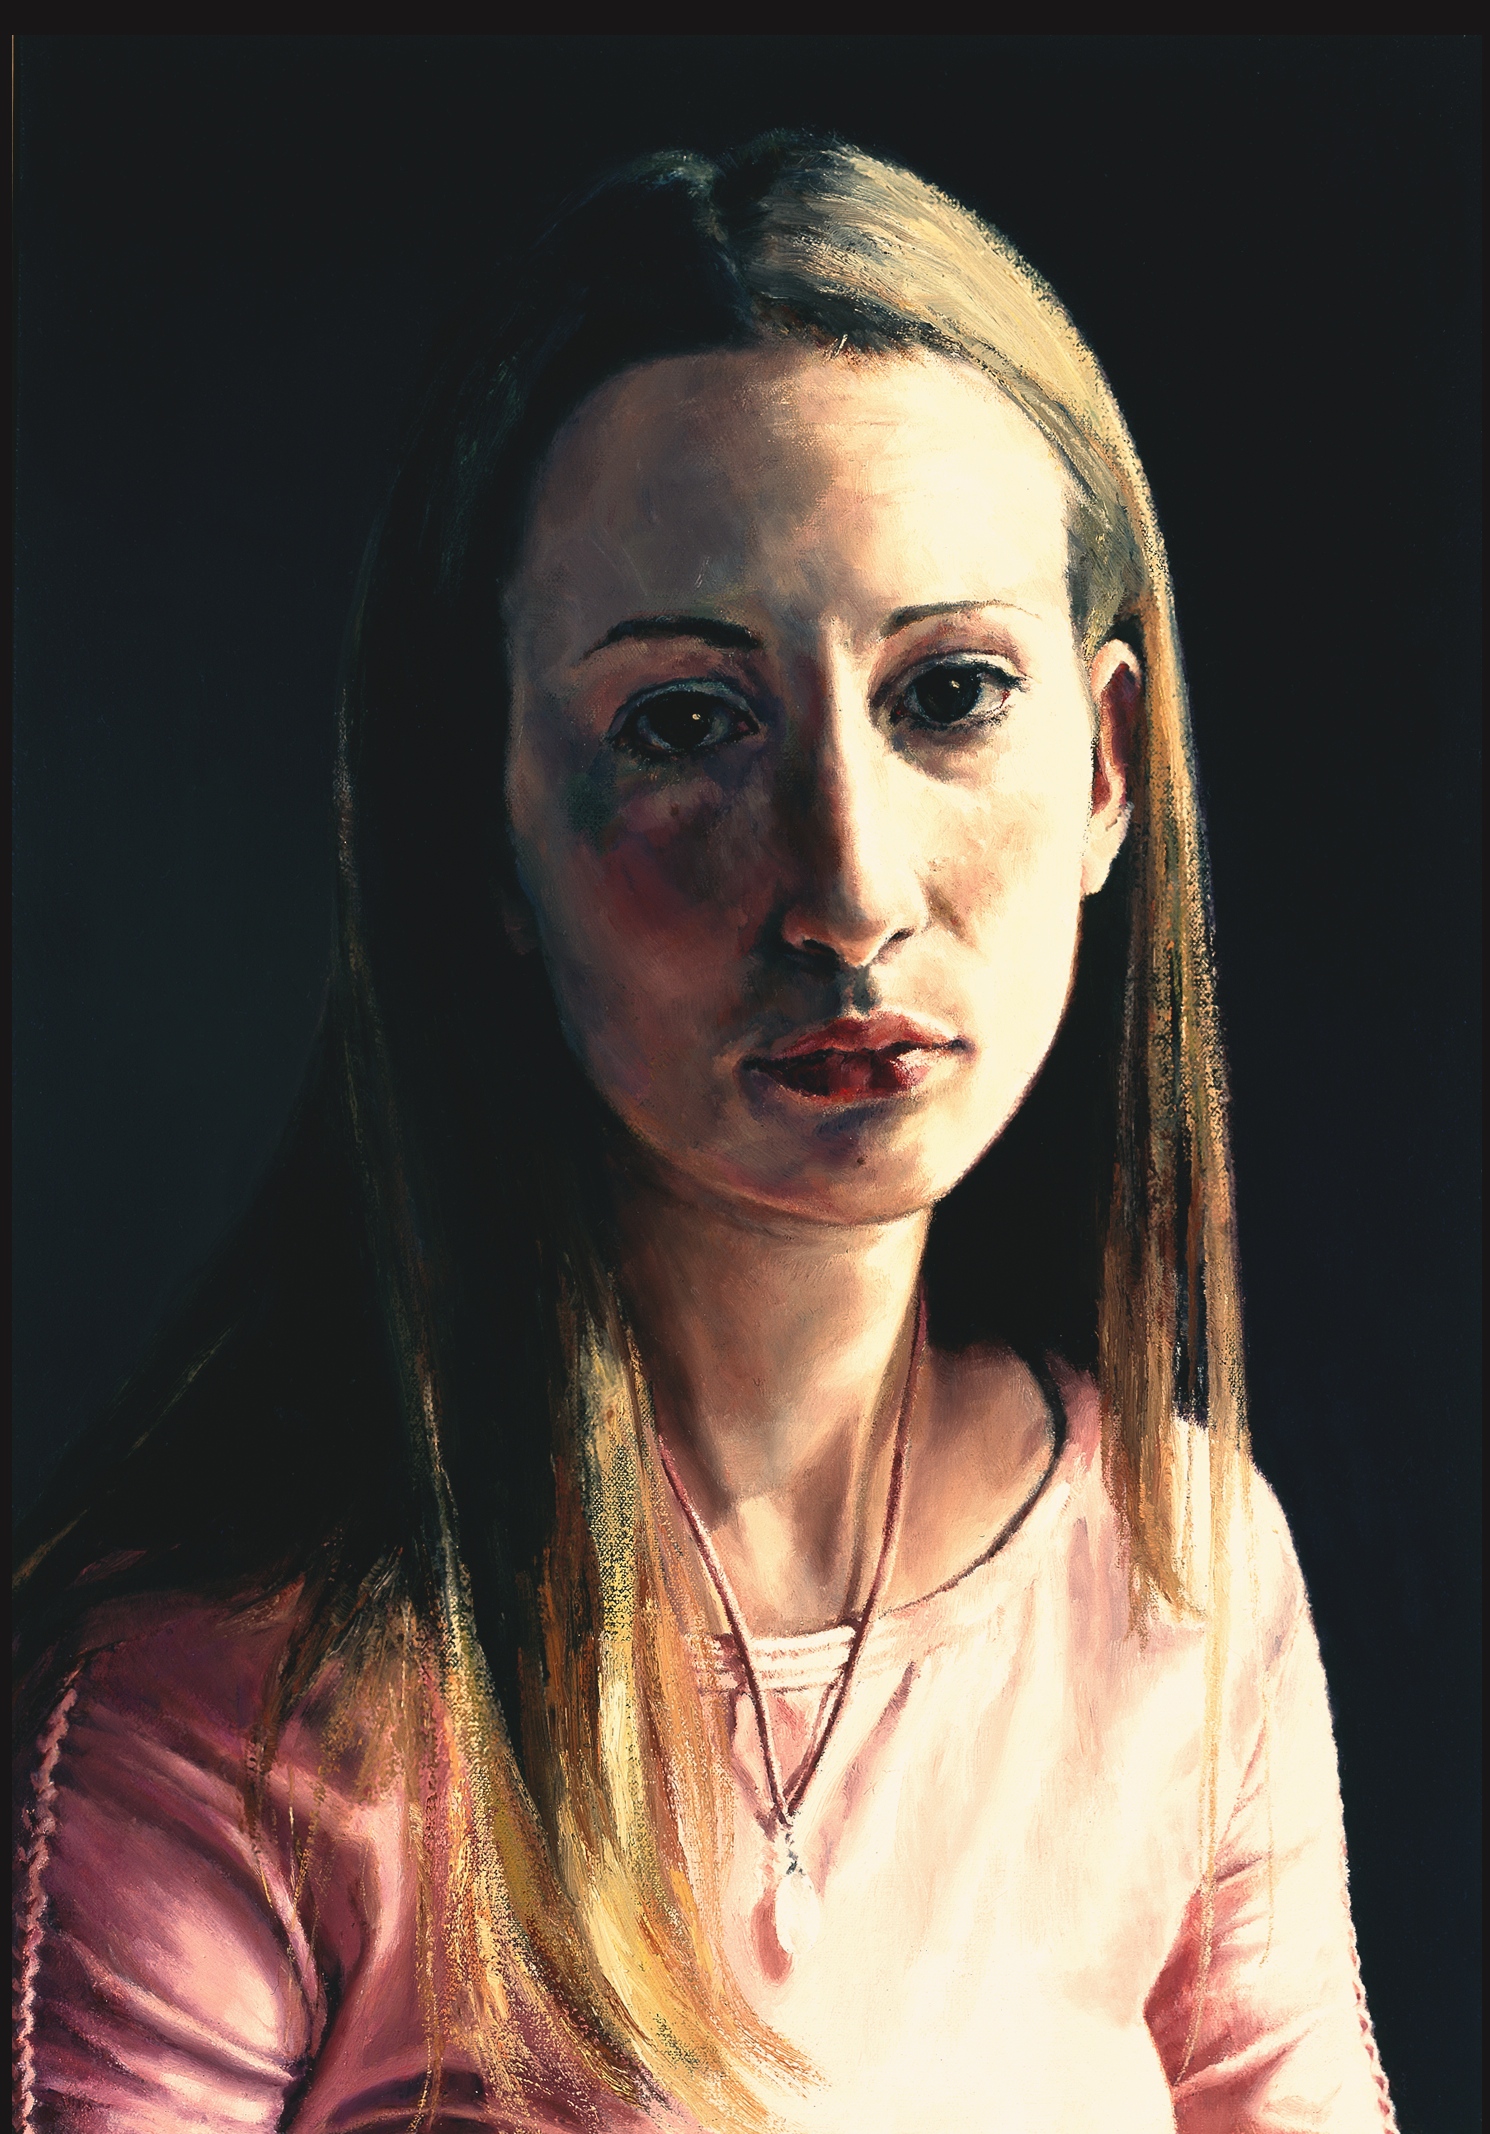   Miss Anne Wingate, 17 , Oil on Canvas, 2003, 21" x 15 